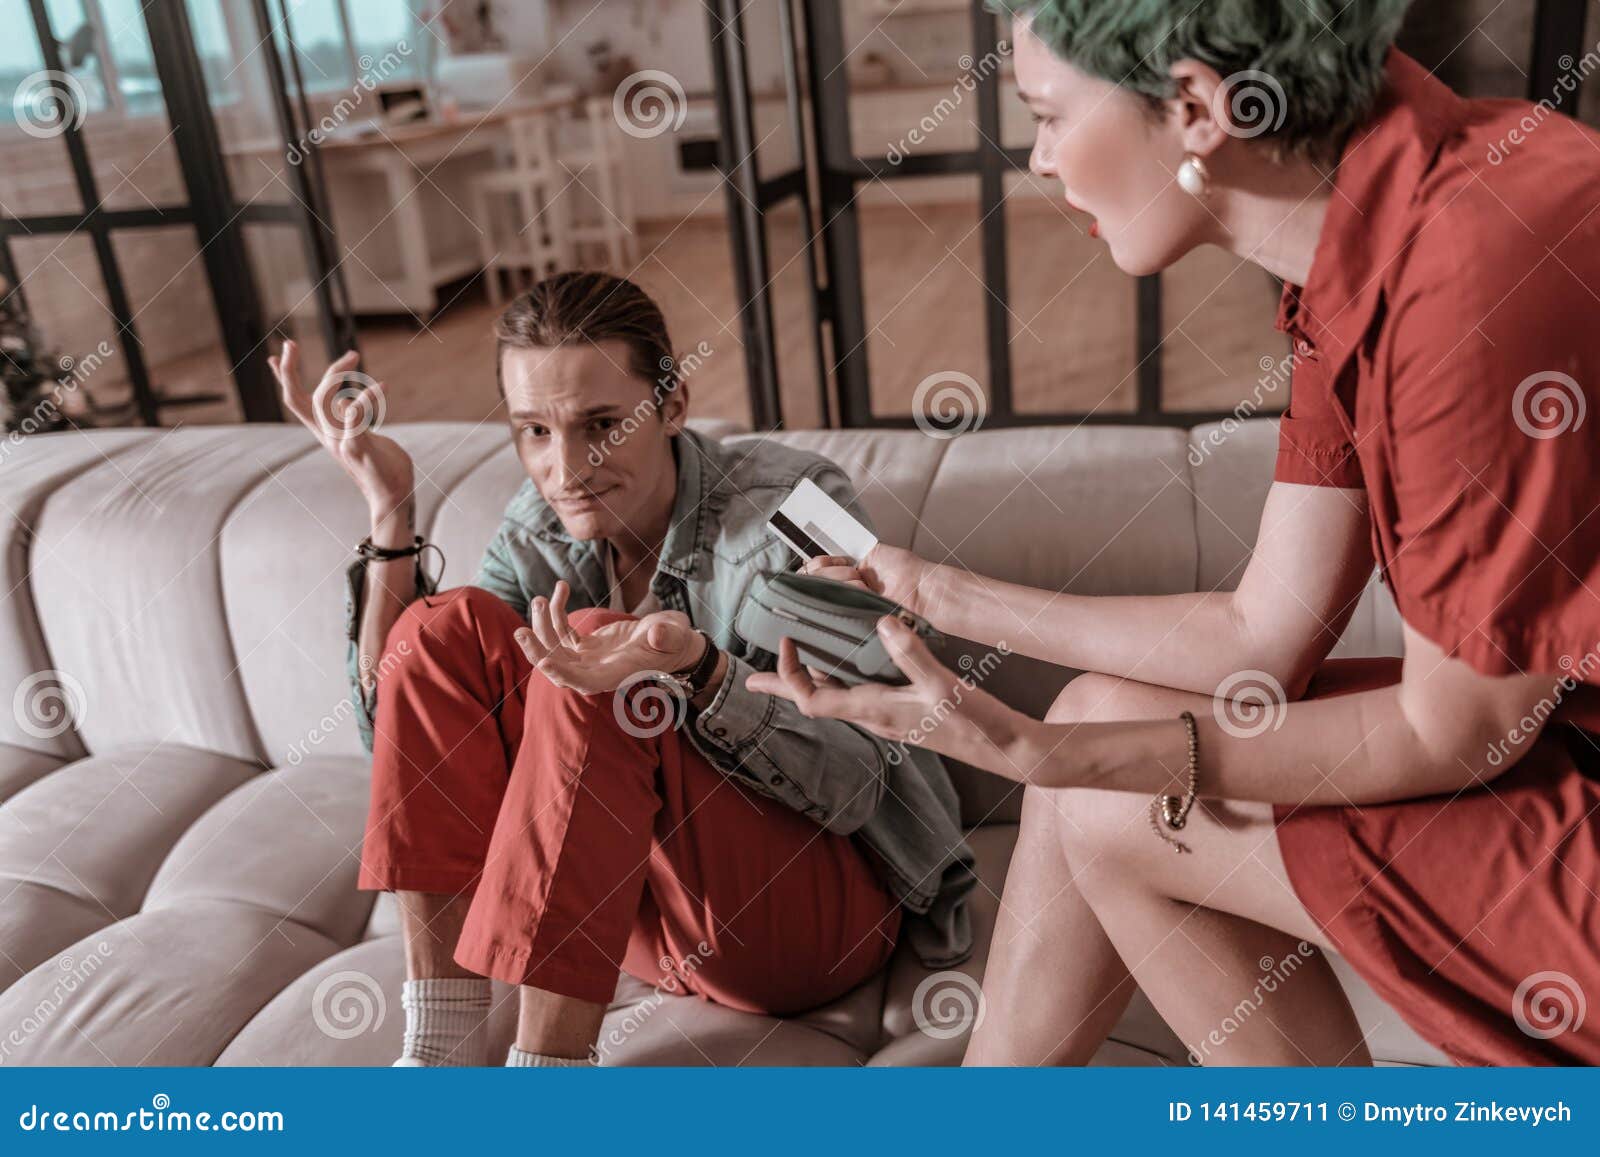 Husband Spending Too Much Money from Family Budget Stock Image - Image